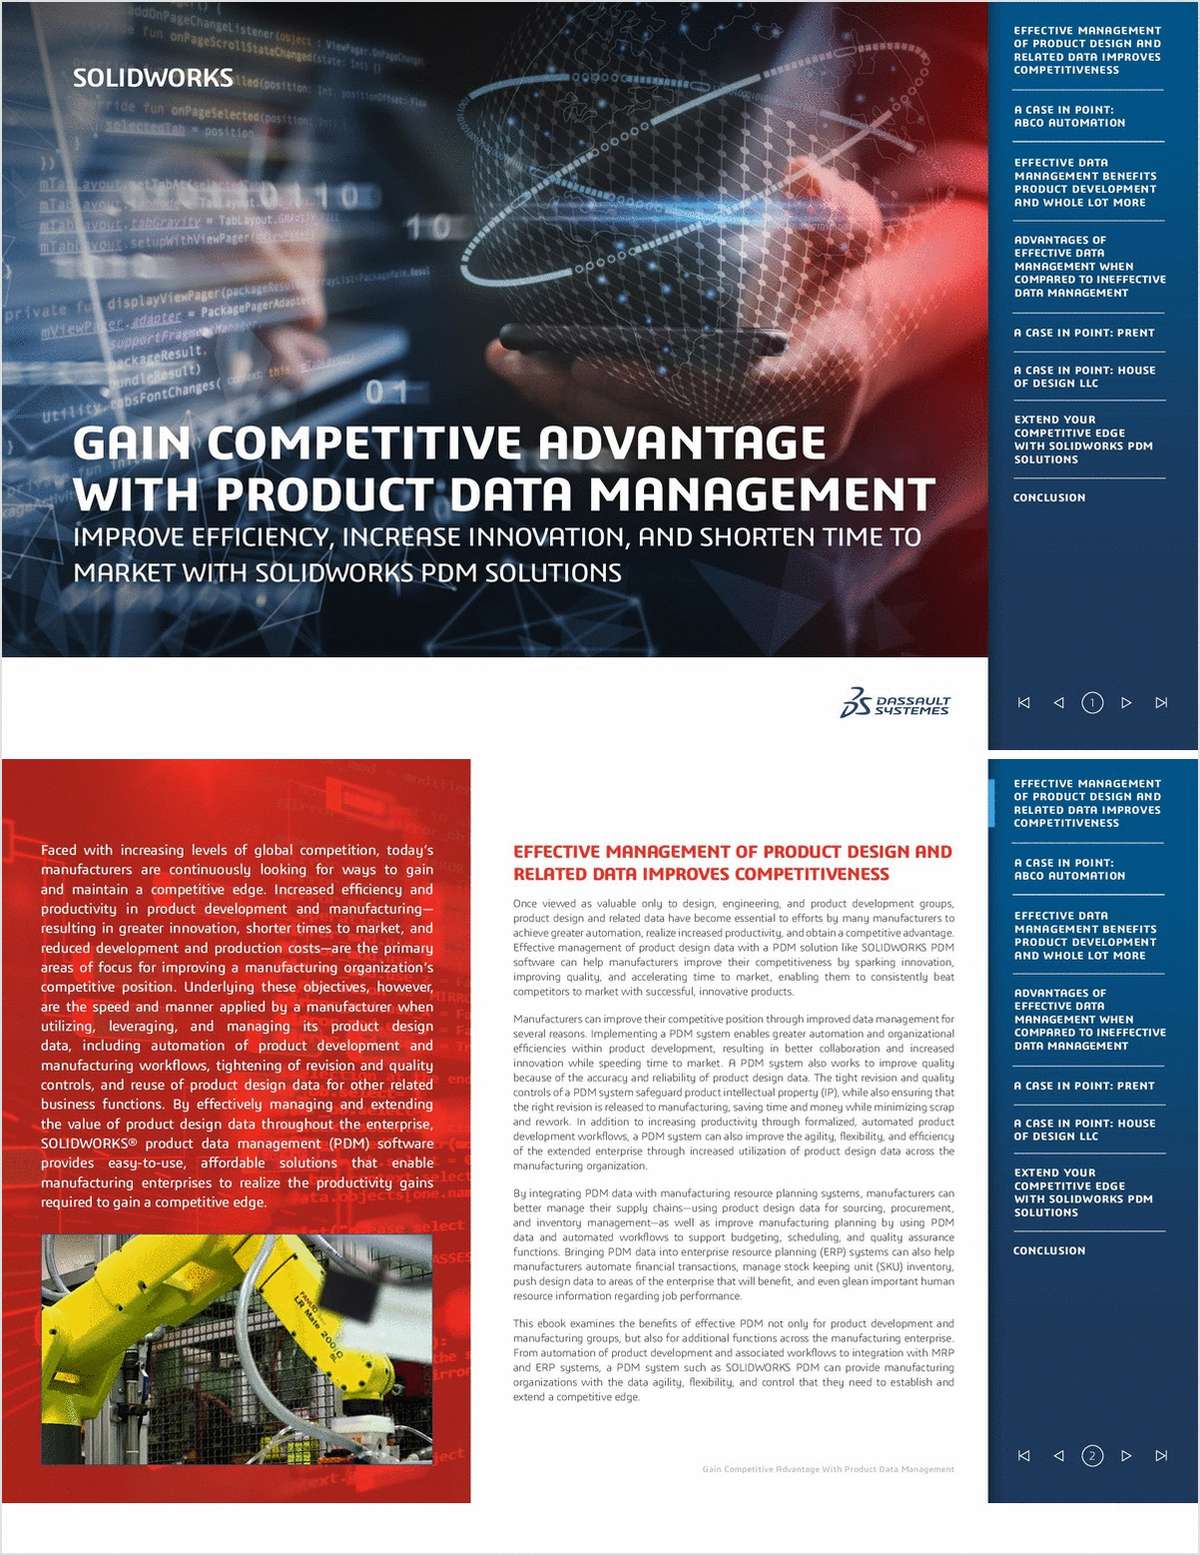 Gain Competitive Advantage with Product Data Management: Improve Efficiency, Increase Innovation, and Shorten Time to Market with SOLIDWORKS PDM Solutions